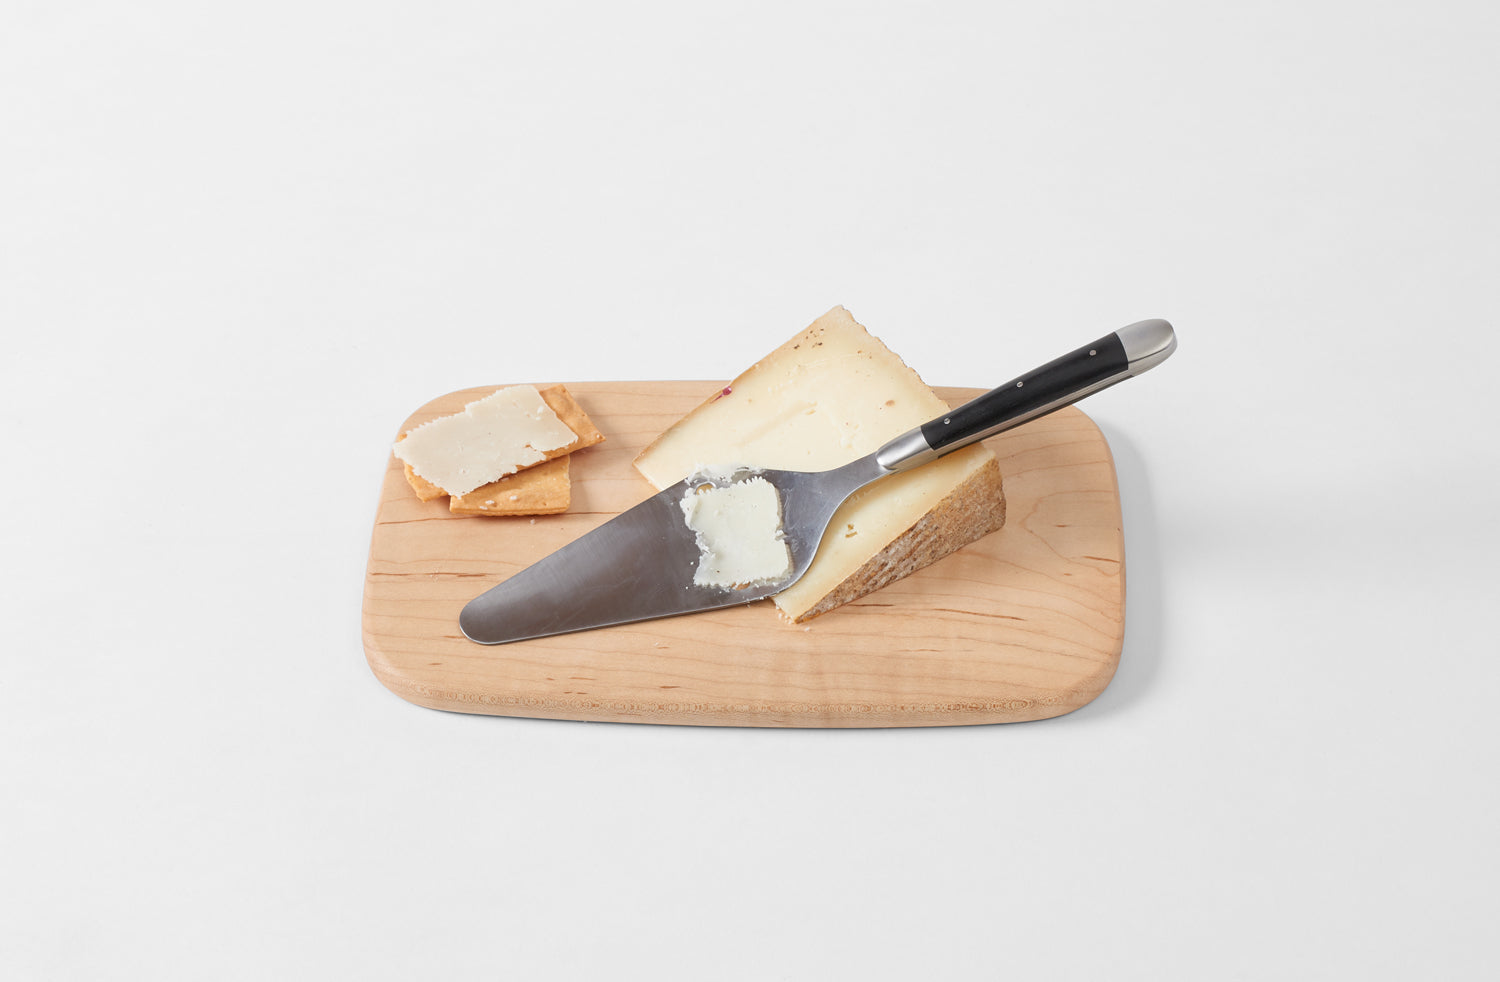 Marble Cheese Board & Slicer - Chevalier Diffusion - Meilleur du Chef